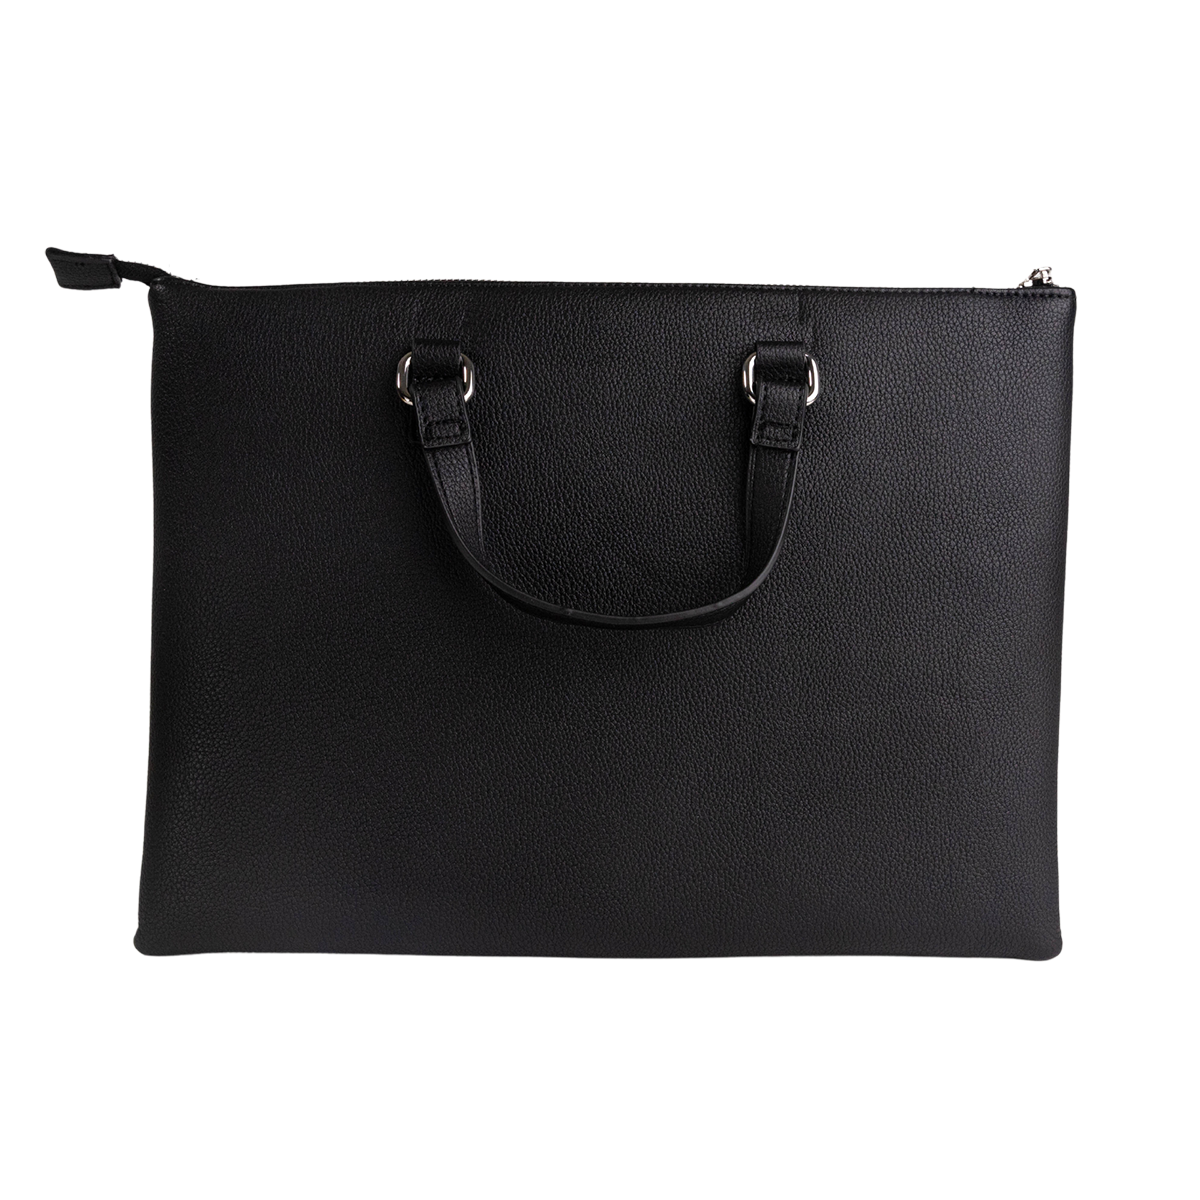 Laptop Bag and Case - Catherine